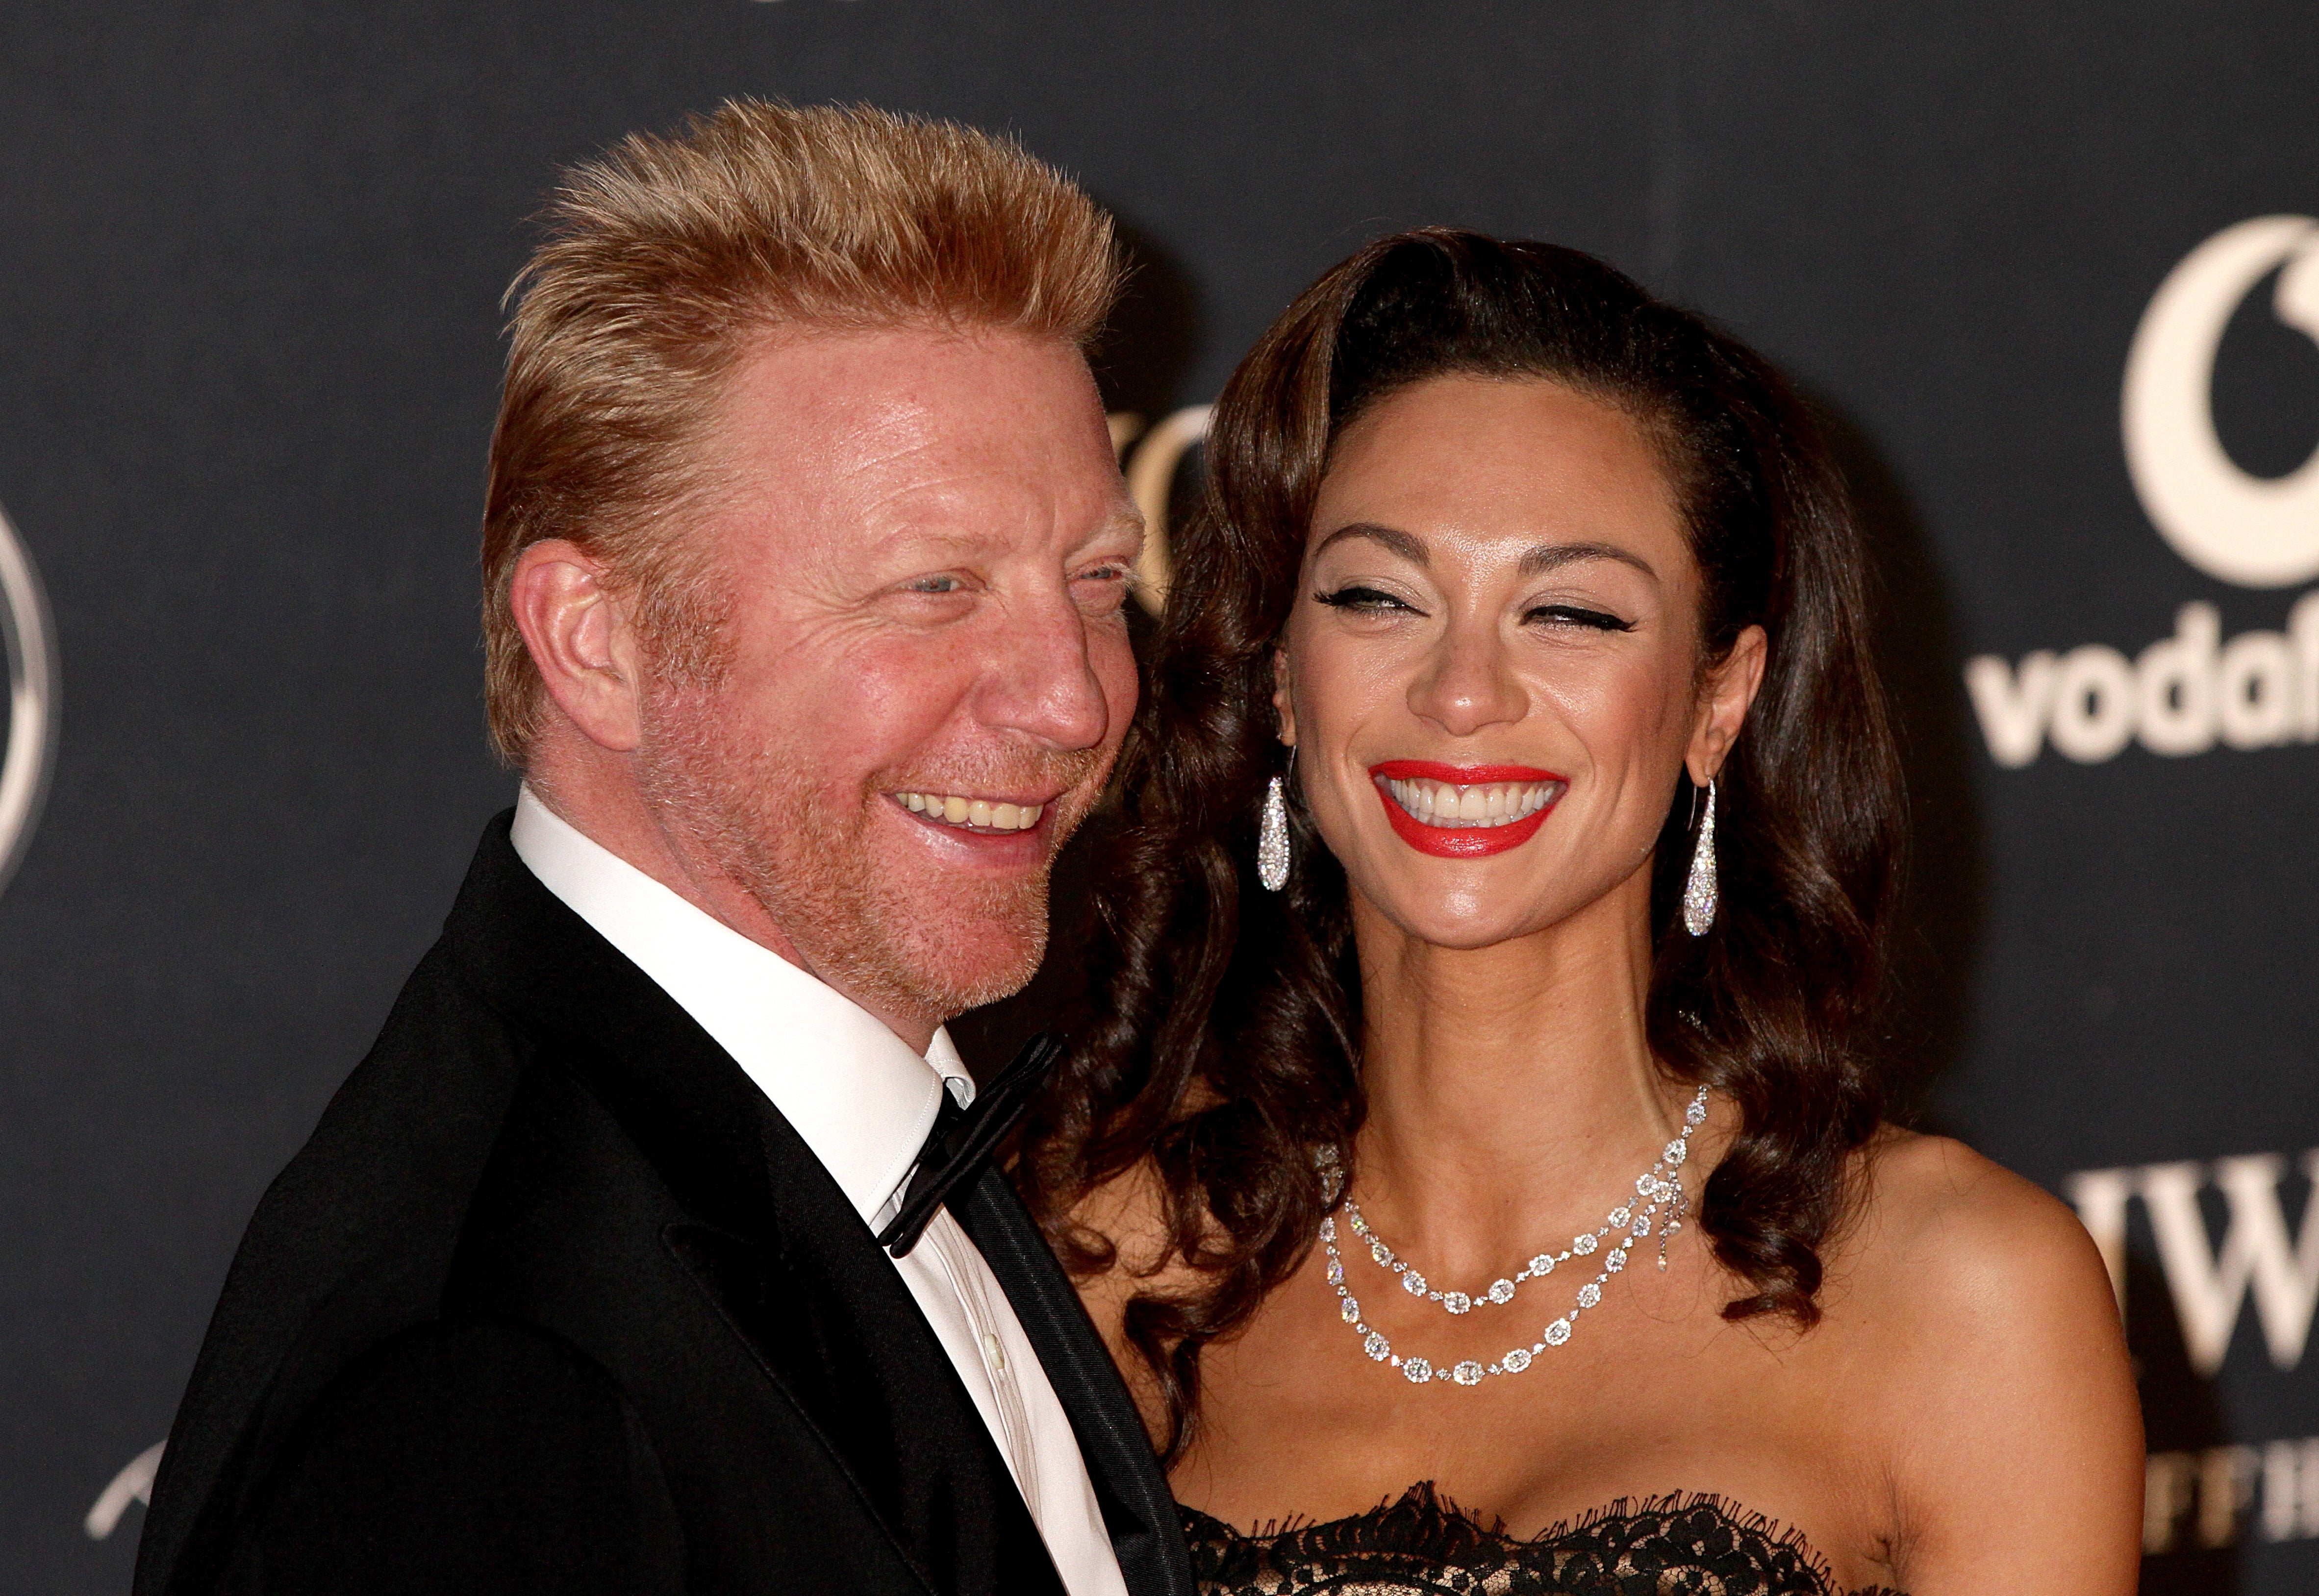 Boris Becker and then-wife Lilly